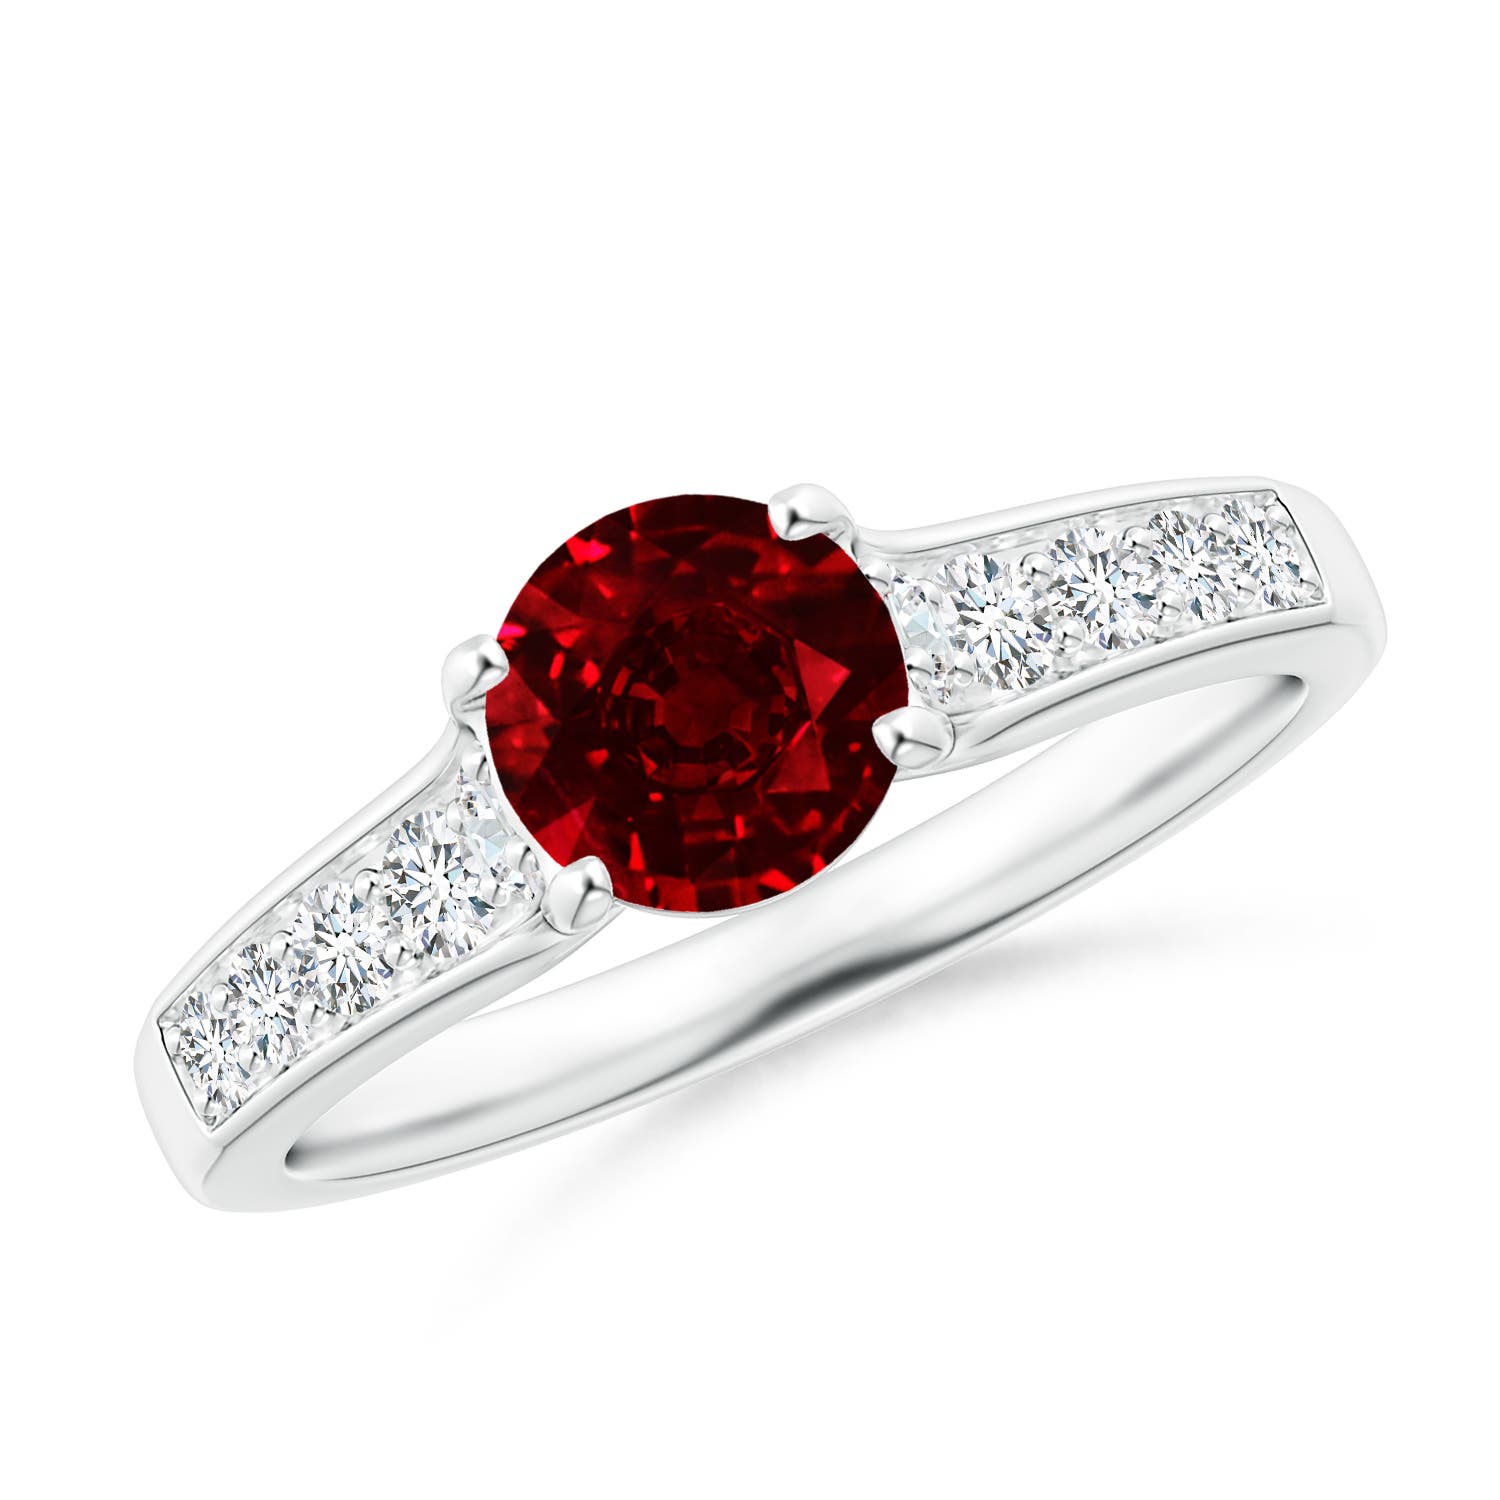 AAAA - Ruby / 1.38 CT / 14 KT White Gold